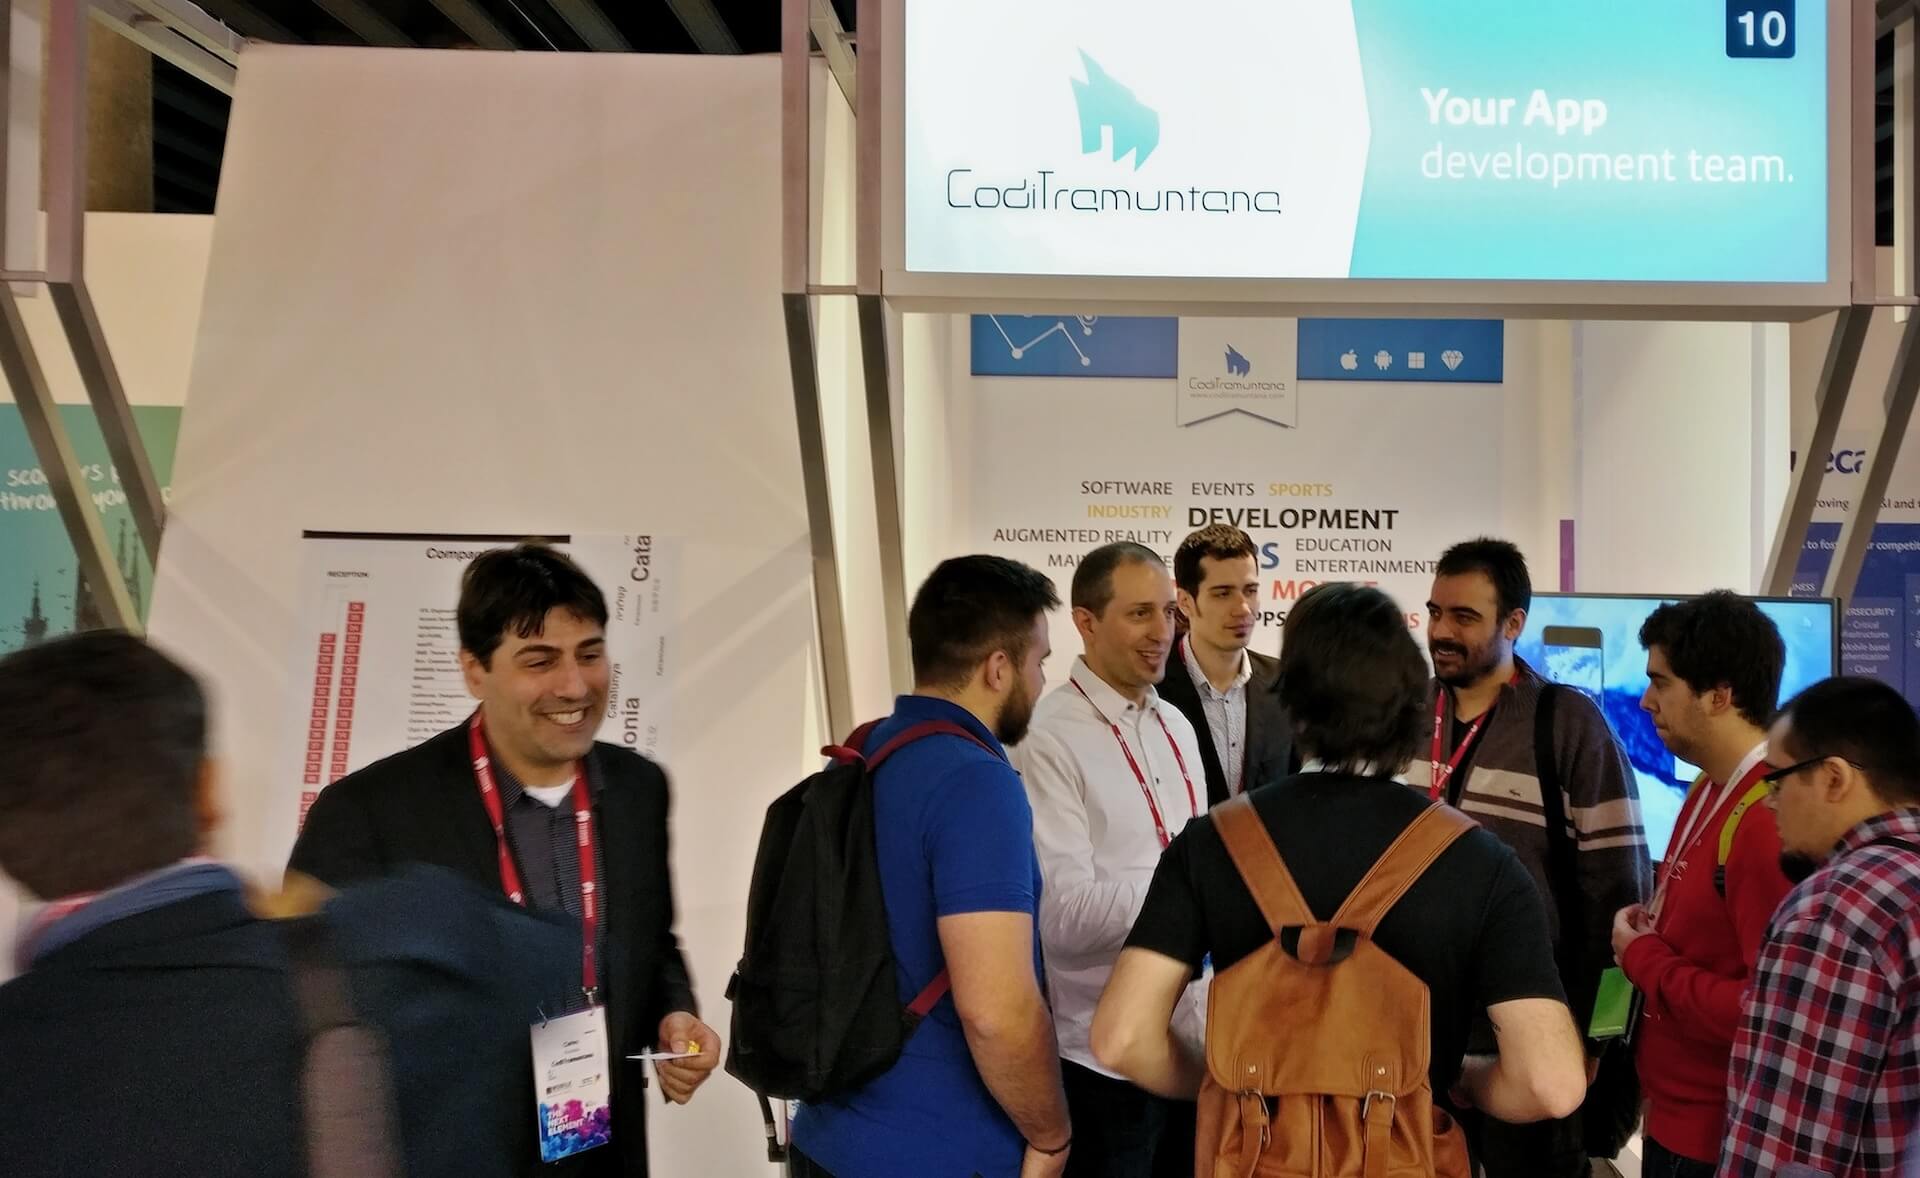 9 persons visiting the CodiTramuntana stand at MWC2017 of Barcelona